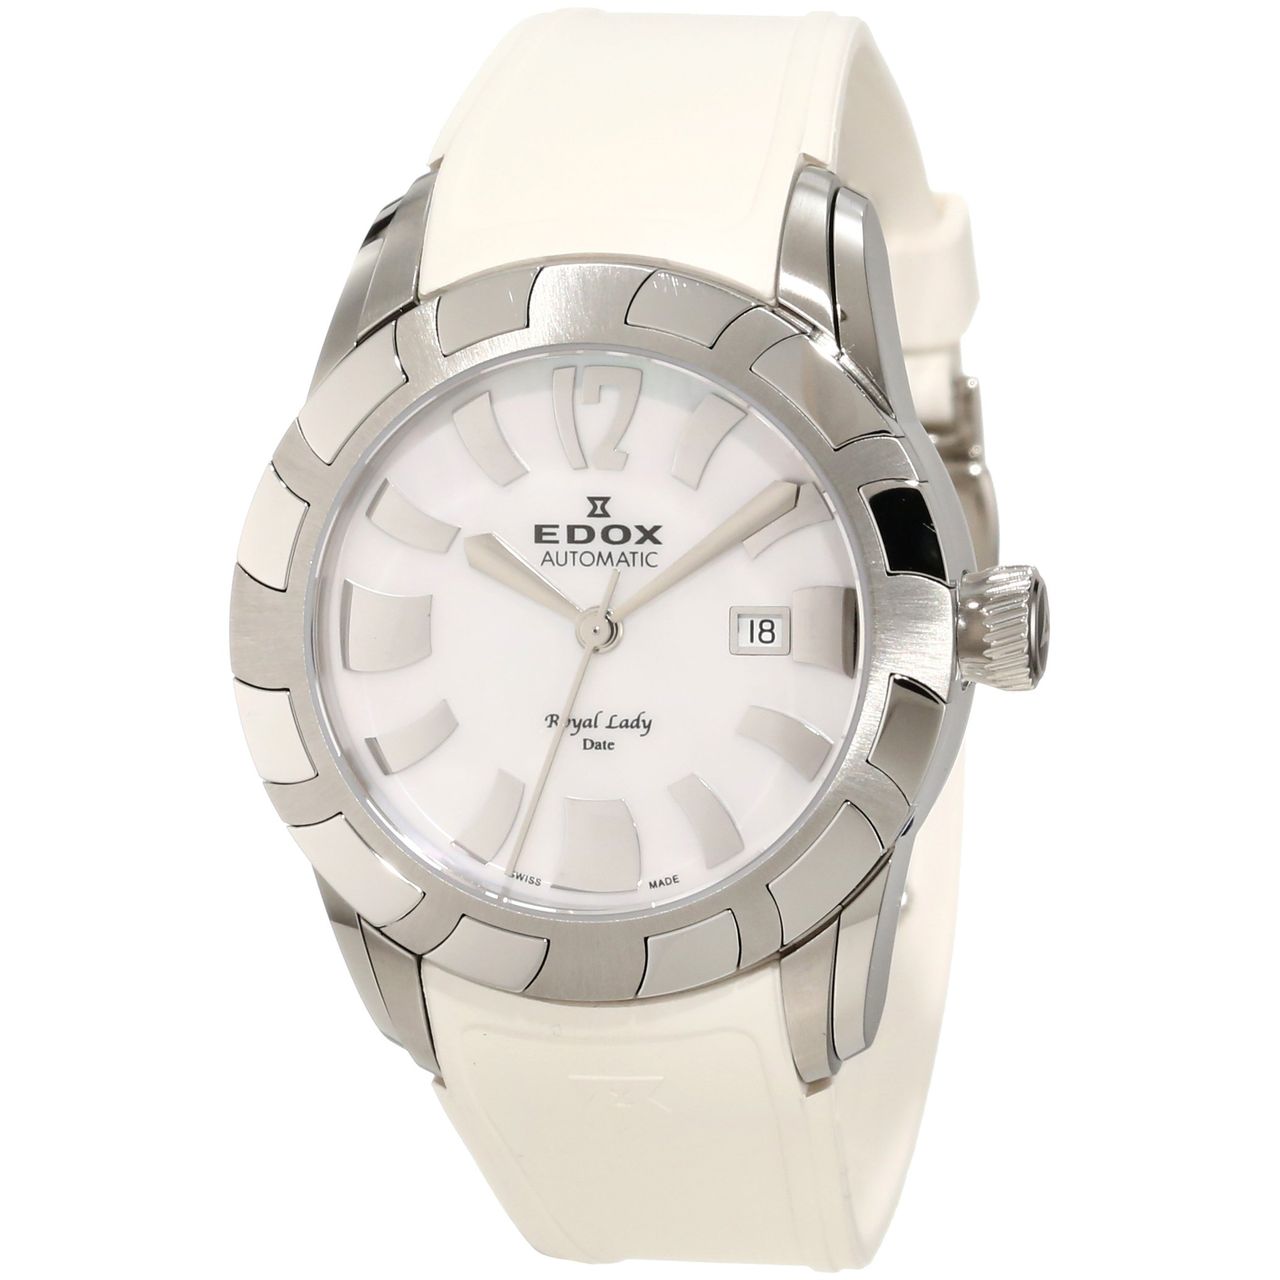 Edox 37007 3 NAIN Womens Mother Of Pearl Dial Analog Automatic Watch